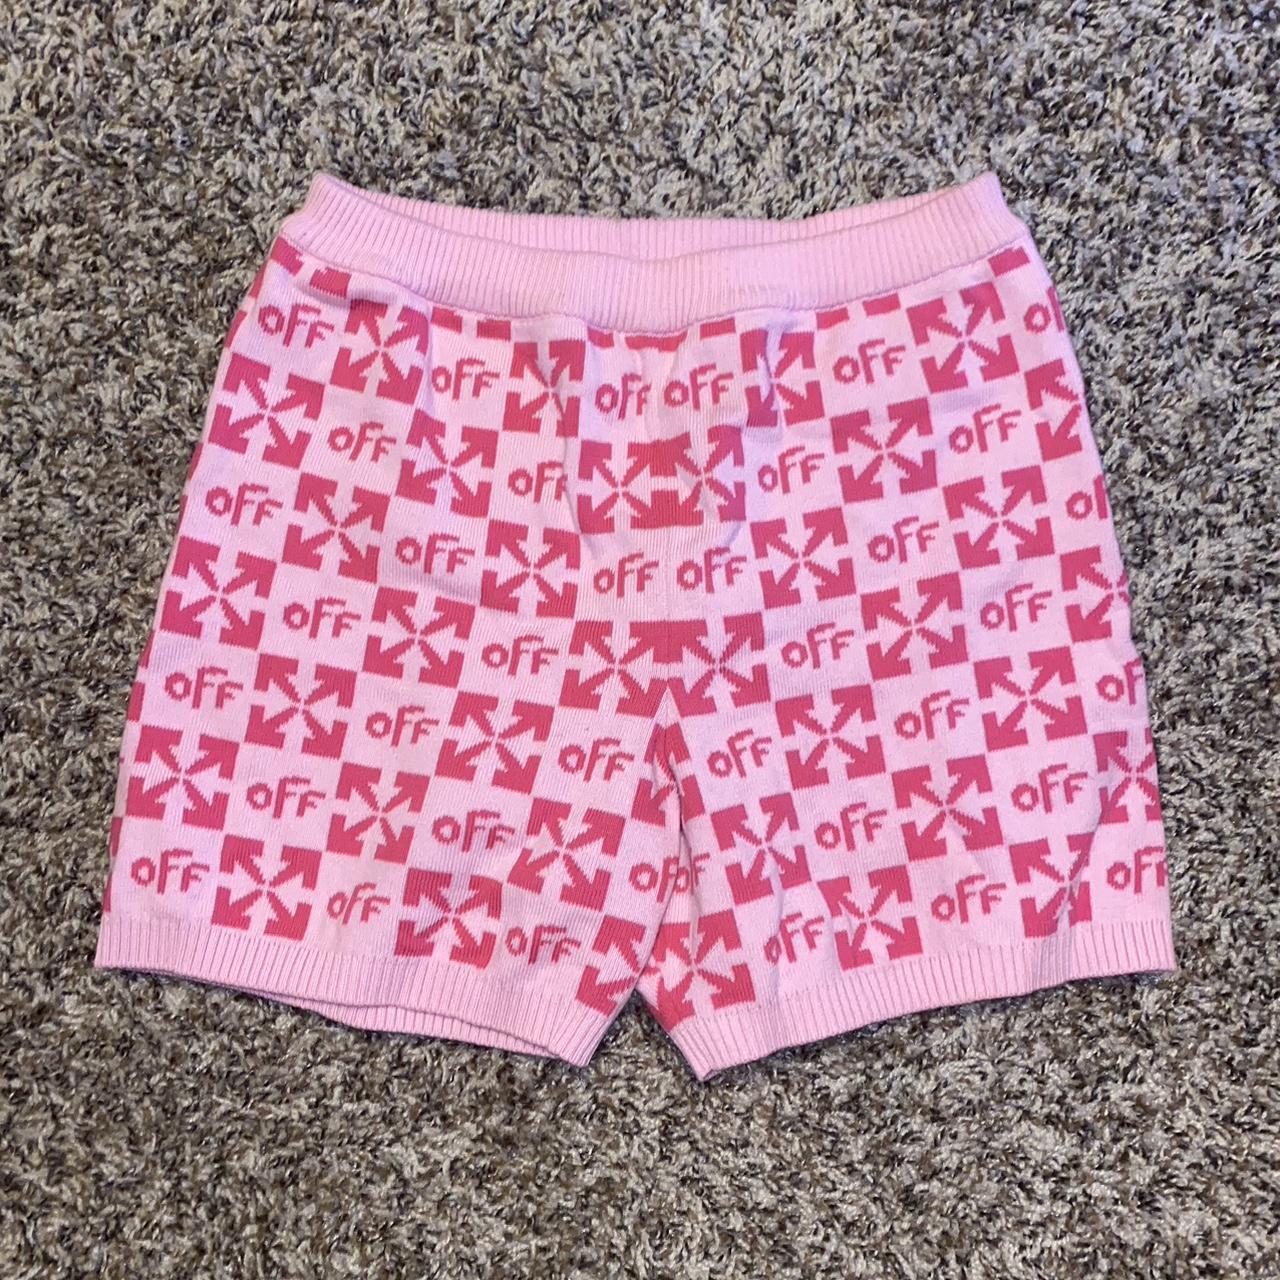 Off-White Women's Pink Shorts